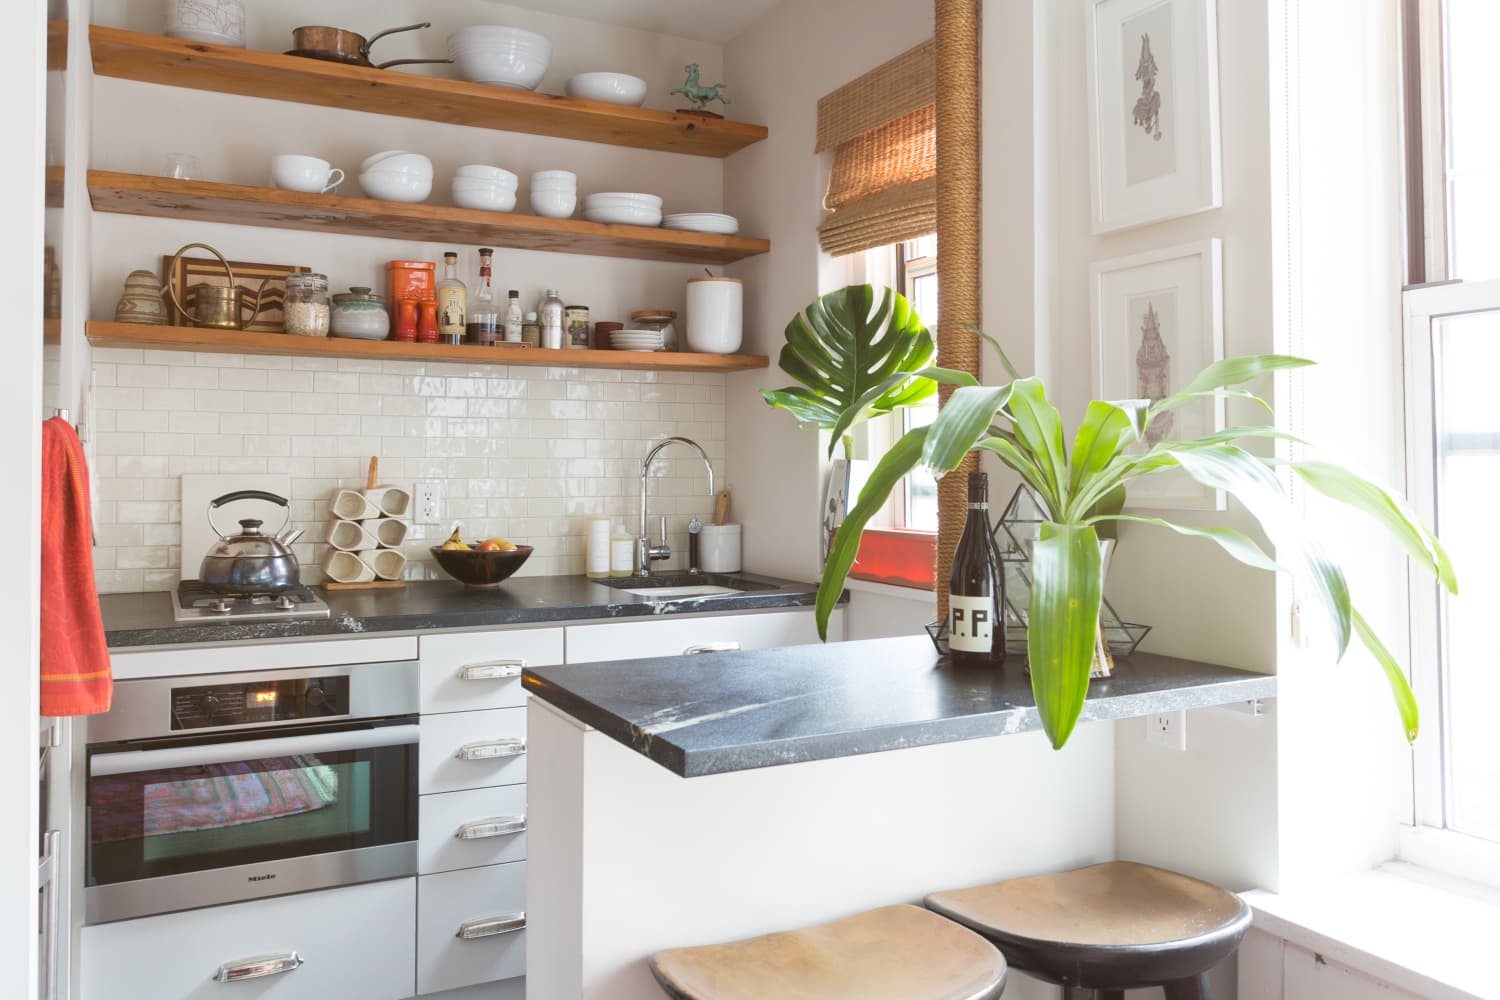 6 Causes Small Kitchens Are Method Higher than Bigger Ones